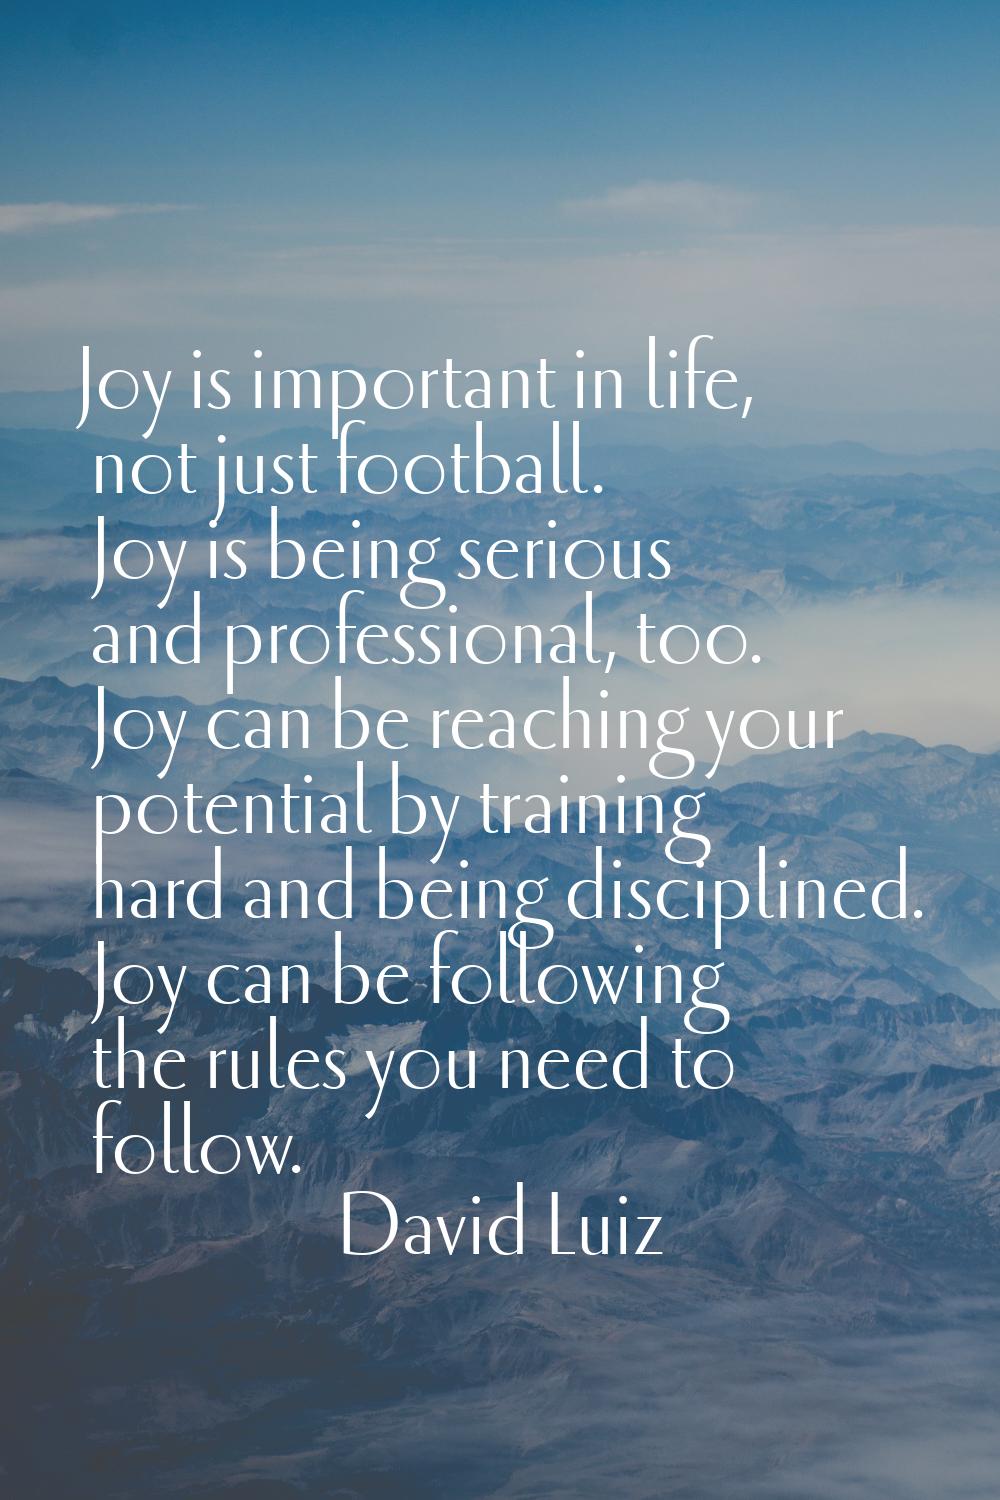 Joy is important in life, not just football. Joy is being serious and professional, too. Joy can be